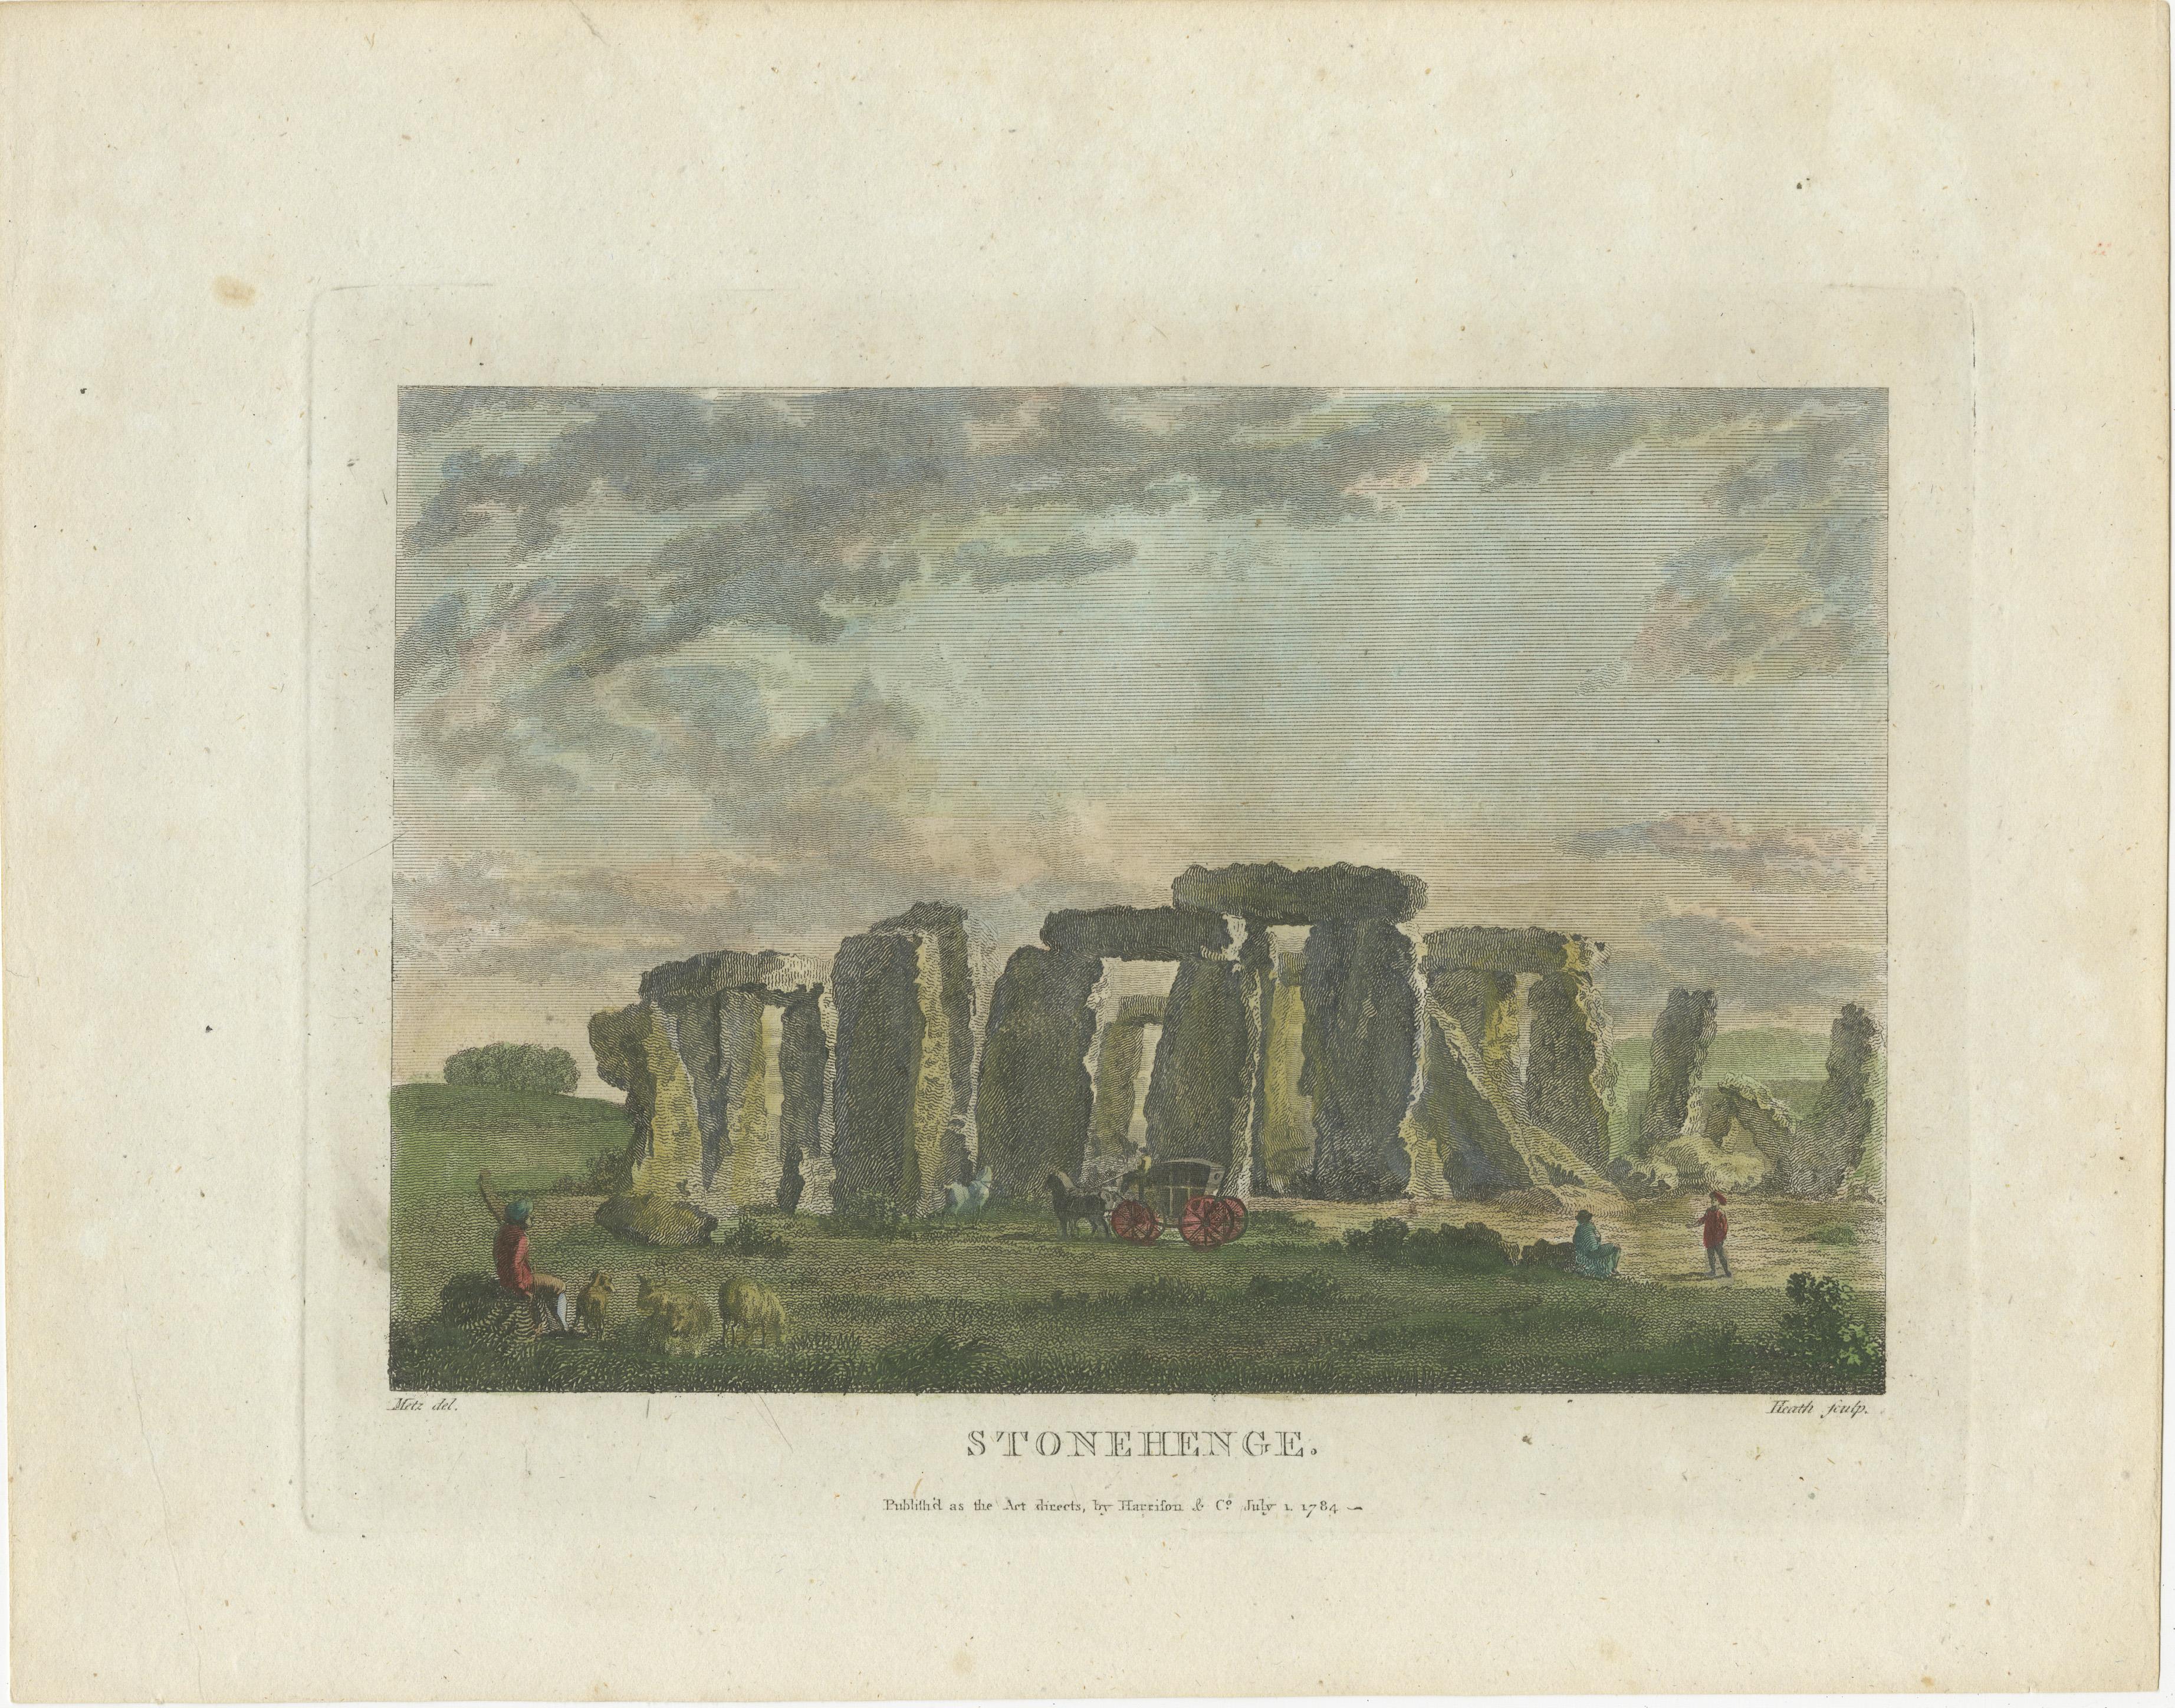 The print depicts Stonehenge, an iconic prehistoric monument located in Wiltshire, England. 

The image is a south view of Stonehenge, featuring a detailed etching and engraving of the ancient stone circle. In the scene, various human figures and